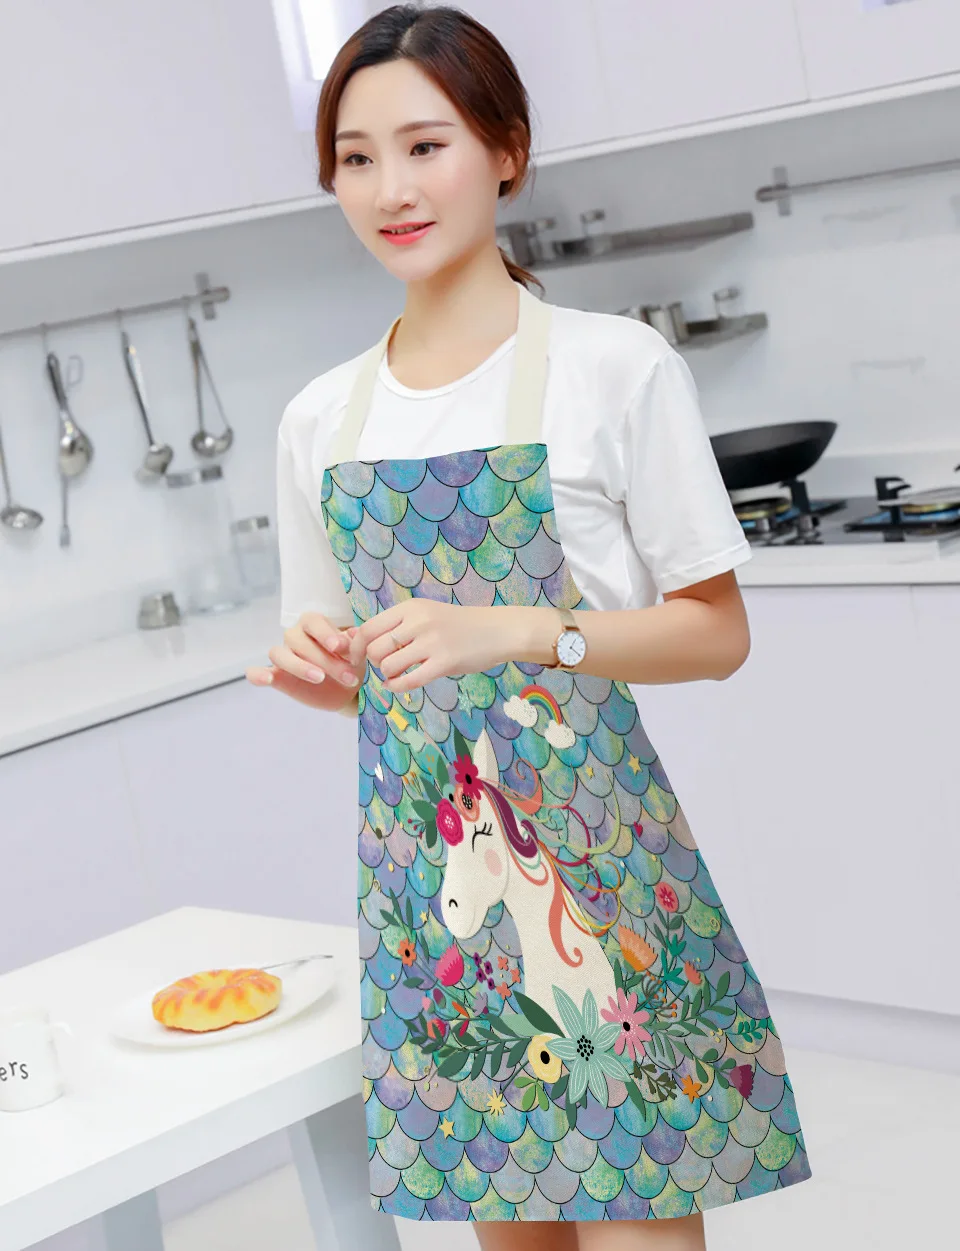 

Unicorn Printed Kitchen Cooking Aprons For Women Chef Baking Bibs Cotton Linen Pinafore Oil-proof Cleaning Apron Delantal Cocina